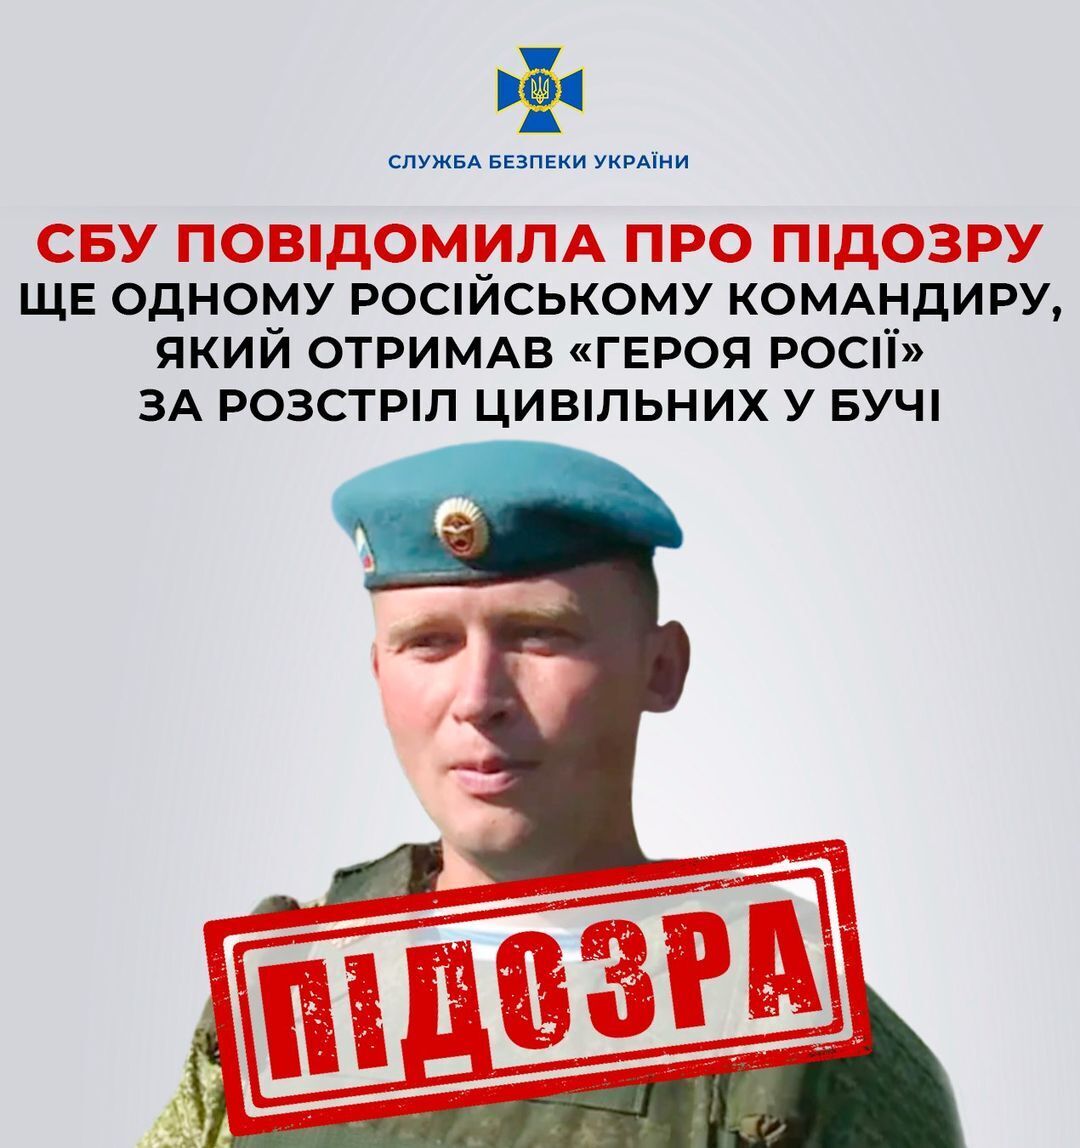 The Security Service of Ukraine has reported the suspicion of an occupant who received the 'Hero of Russia' title for shooting civilians in Bucha. Photo